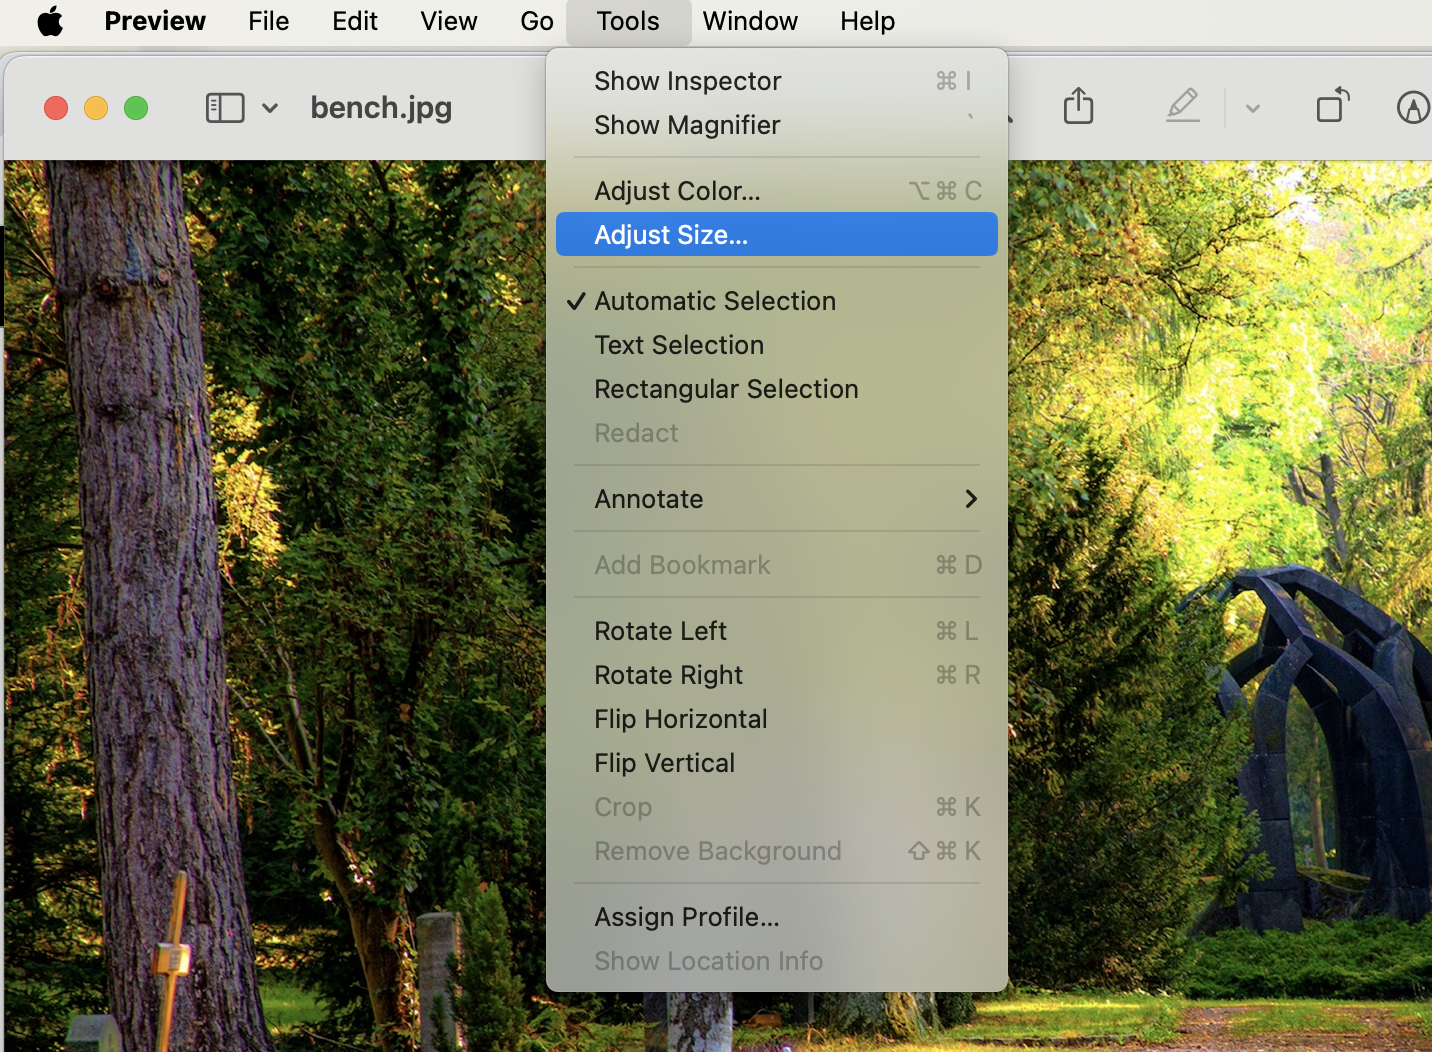 How To Resize Images on Mac with Preview: Step 2